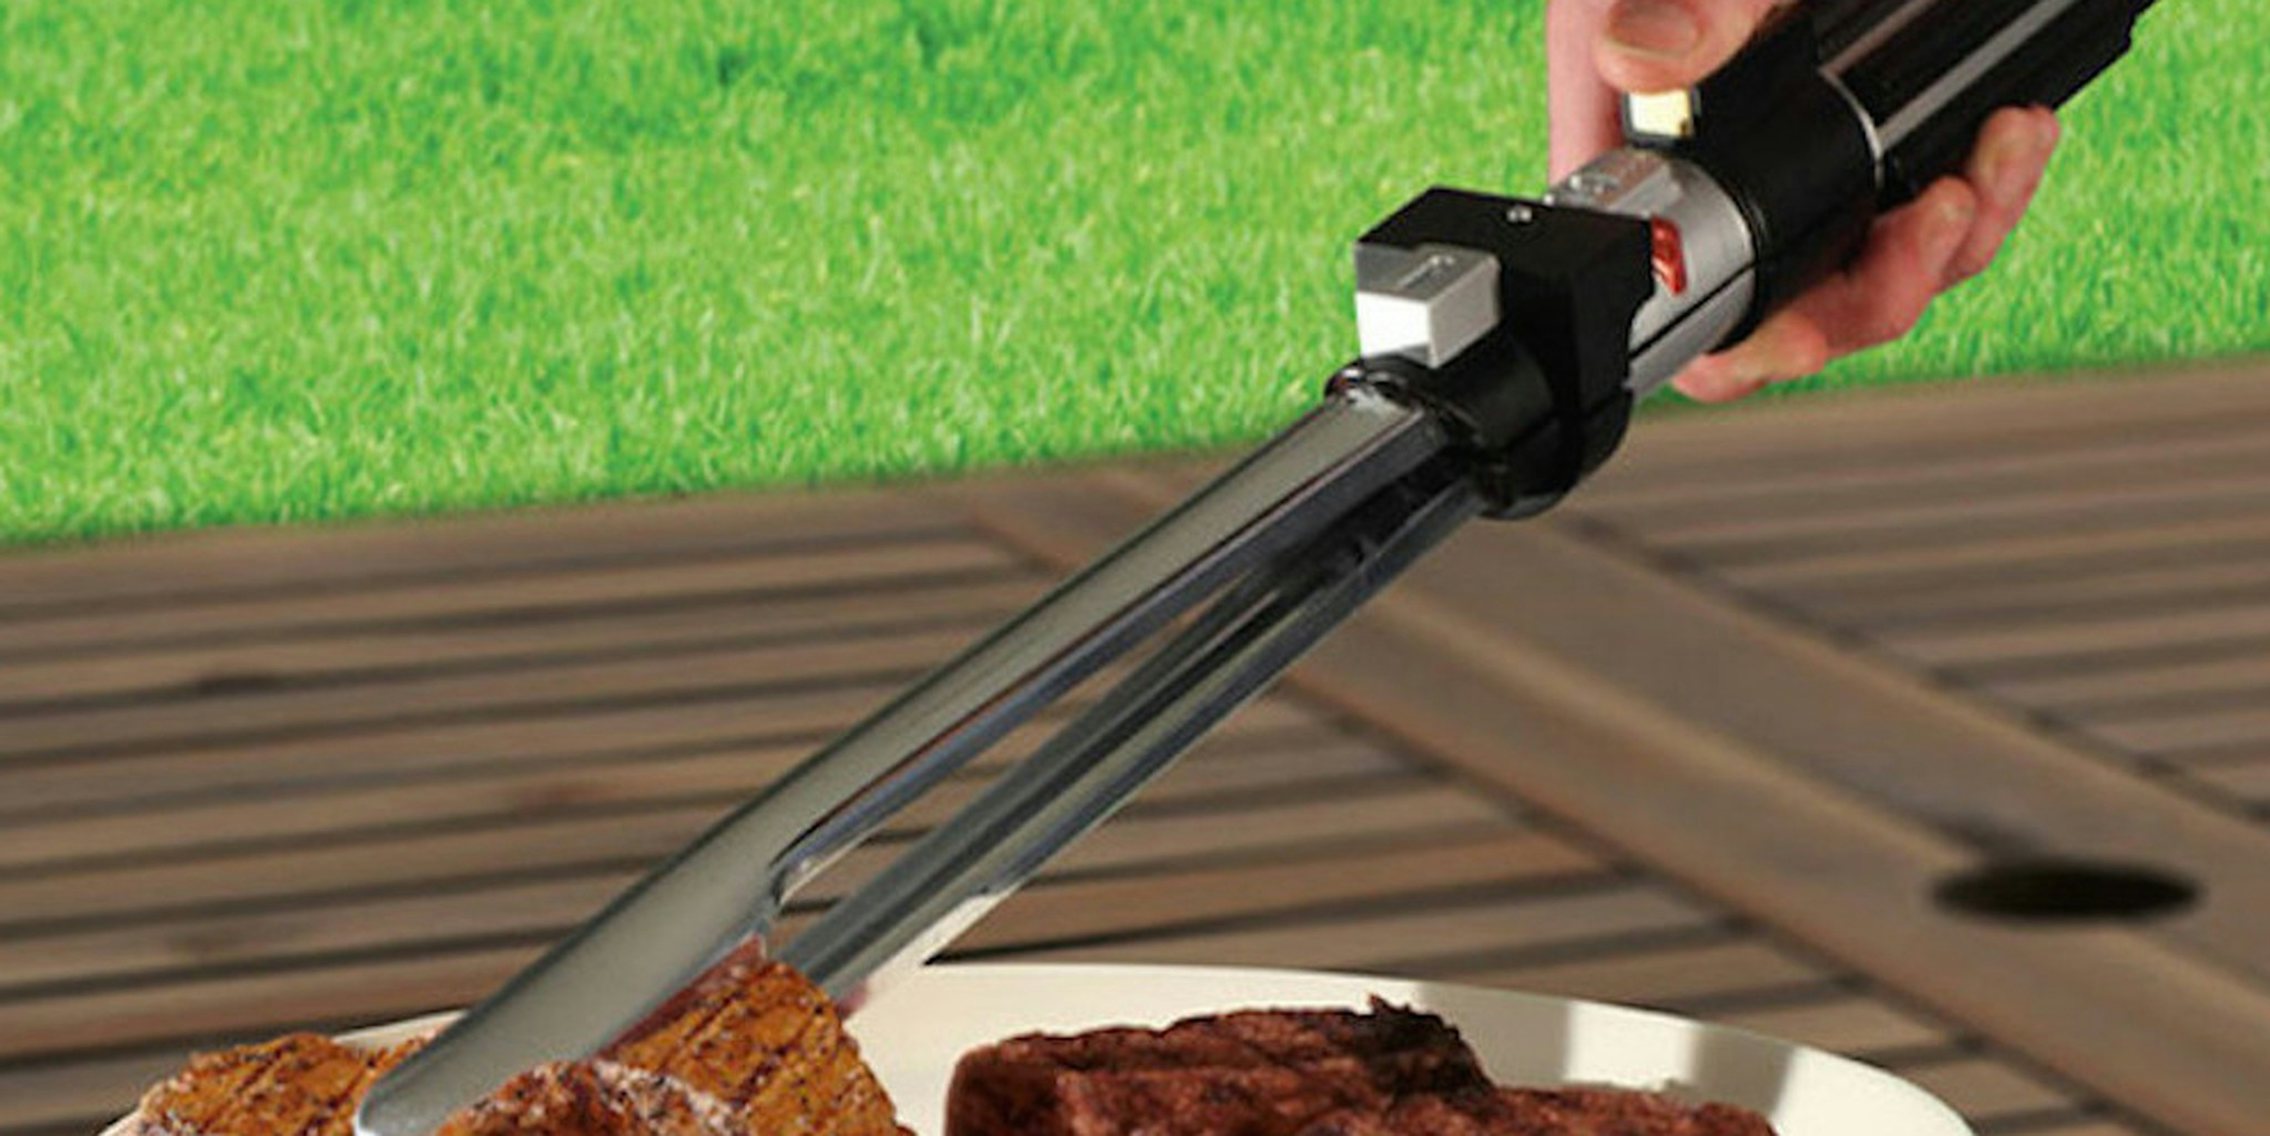 5 Star Wars-inspired BBQ grills for your next geeky backyard party